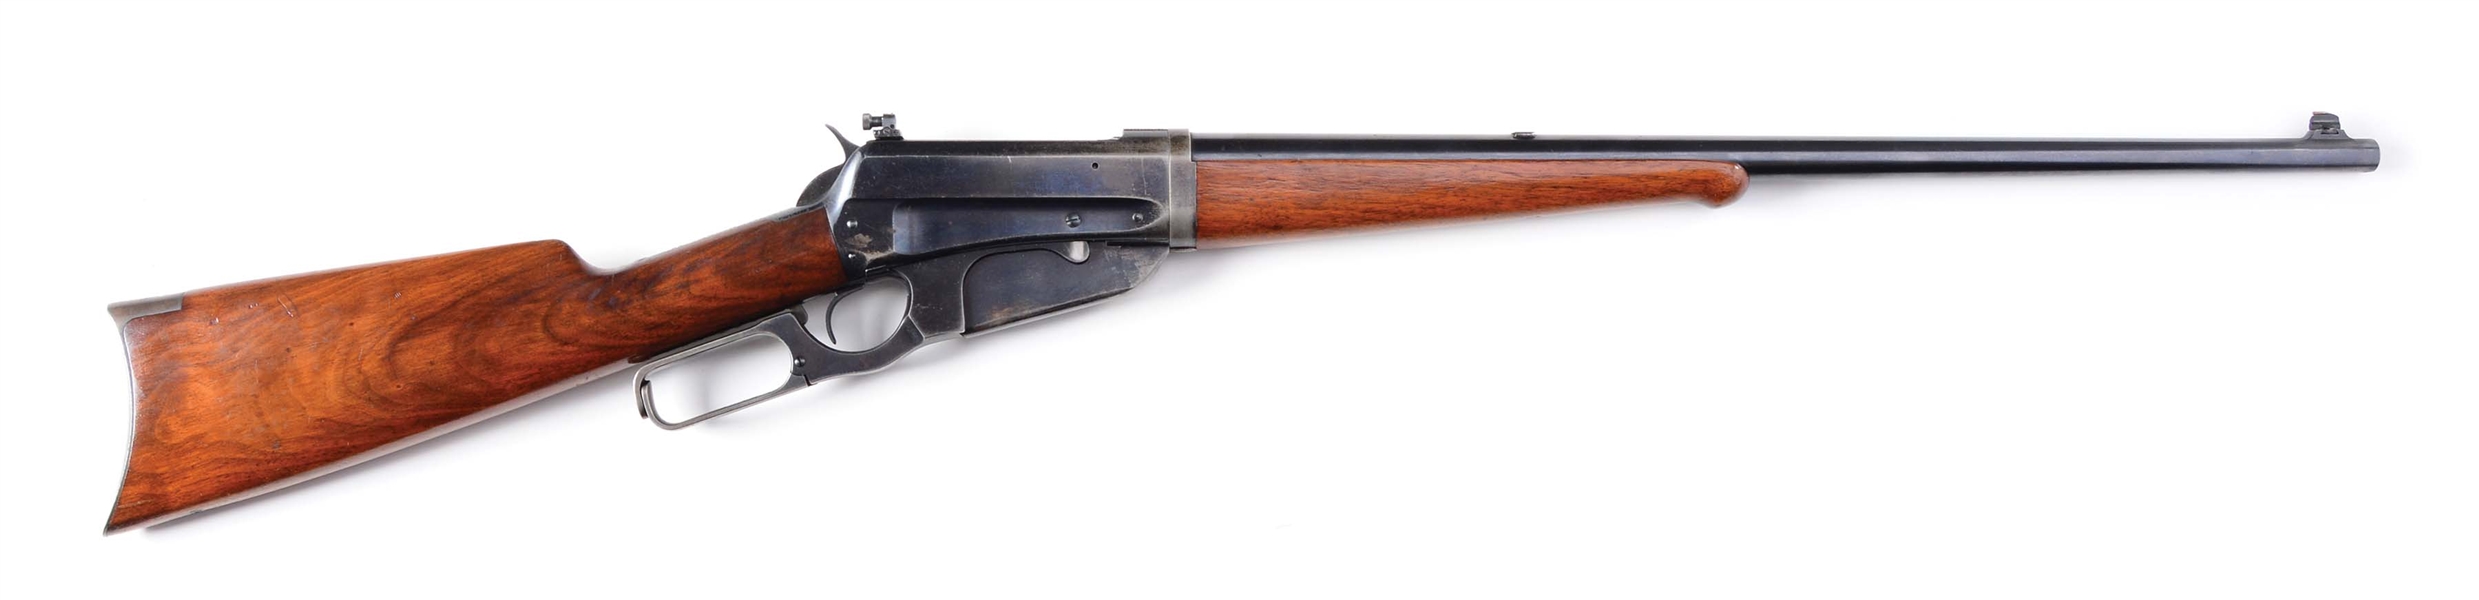 (C) WINCHESTER MODEL 95 TAKEDOWN LEVER ACTION RIFLE (1926).